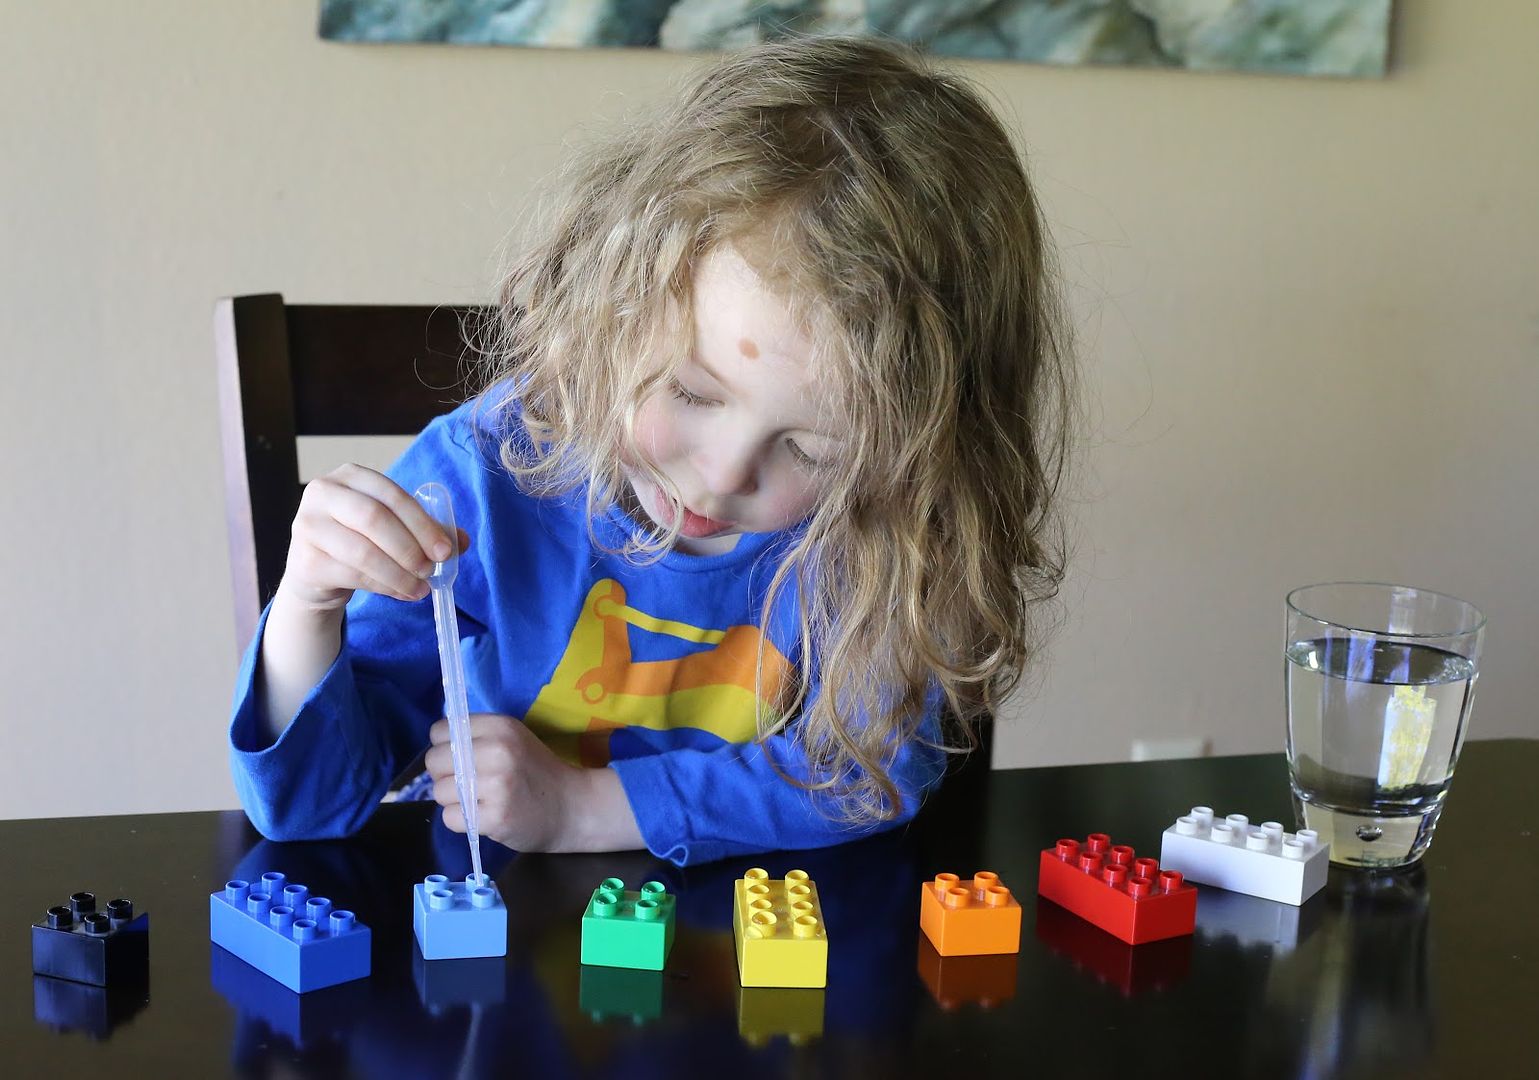 4 great activities to help kids build fine motor skills using LEGO like filling holes with water using a medicine dropper | ideas via Fun at Home With Kids